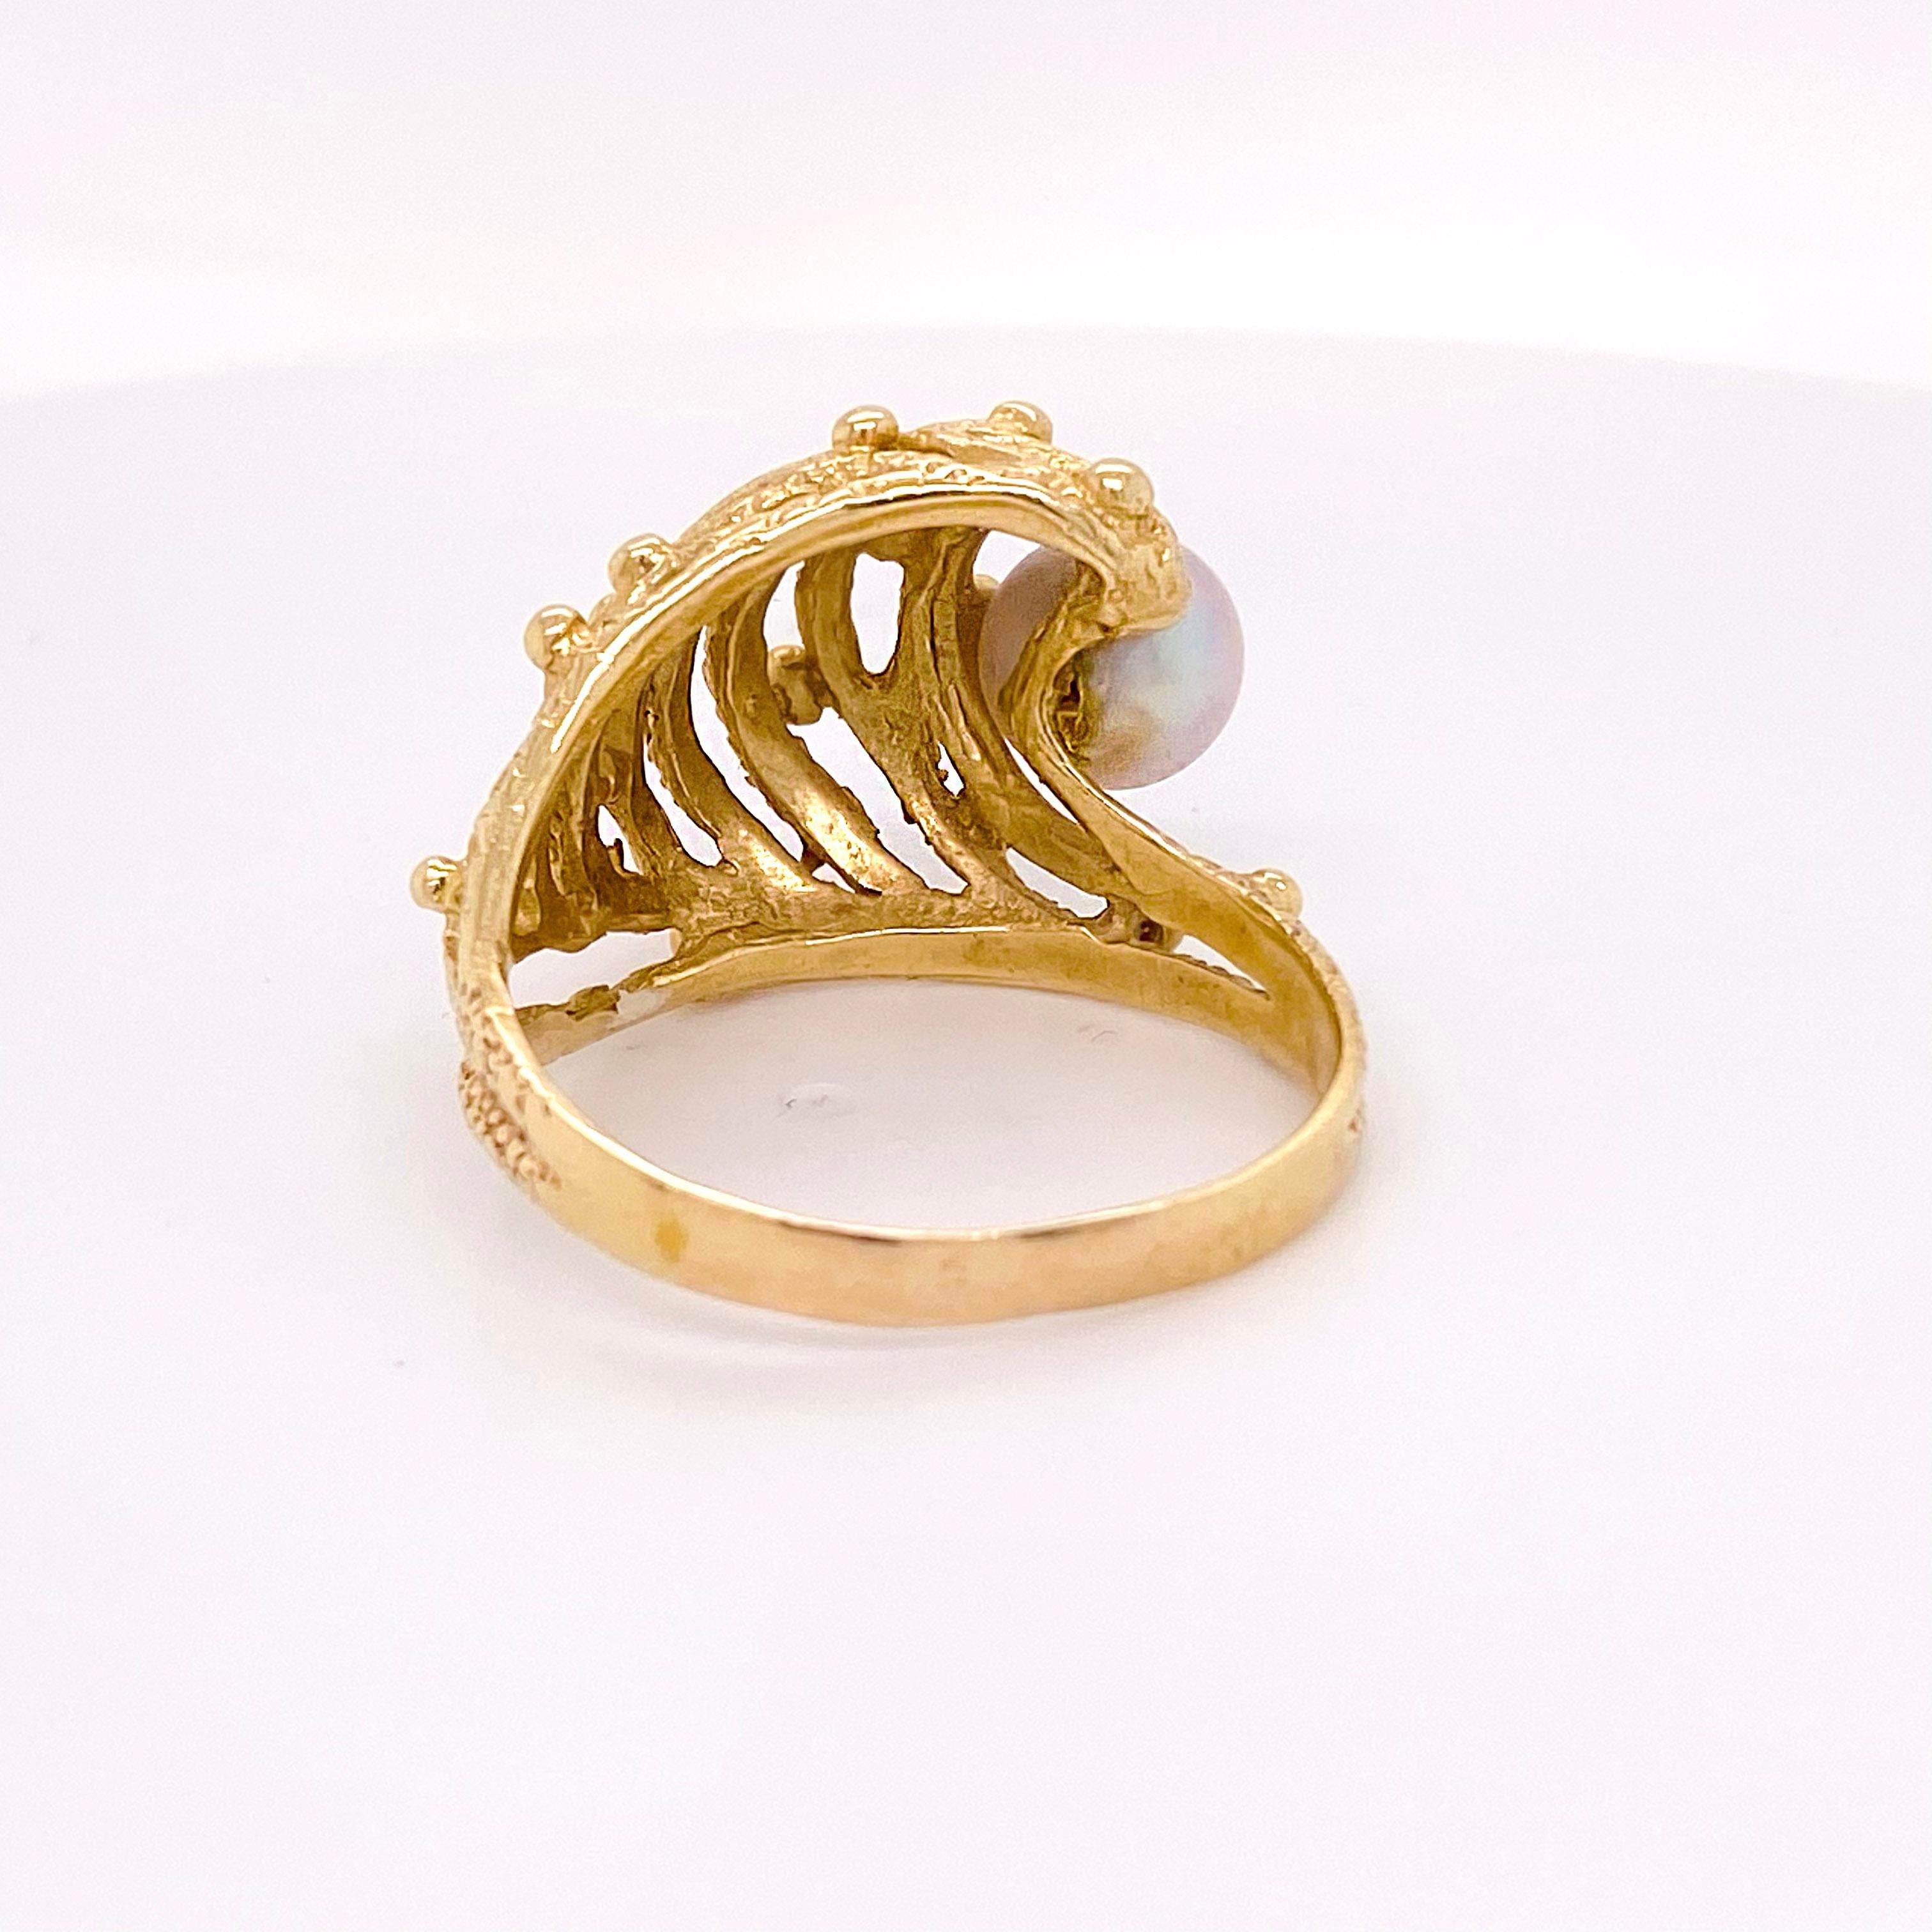 Round Cut Akoya Pearl Ring, Estate Cocktail Ring, Unique Nugget Ring, Yellow Gold For Sale